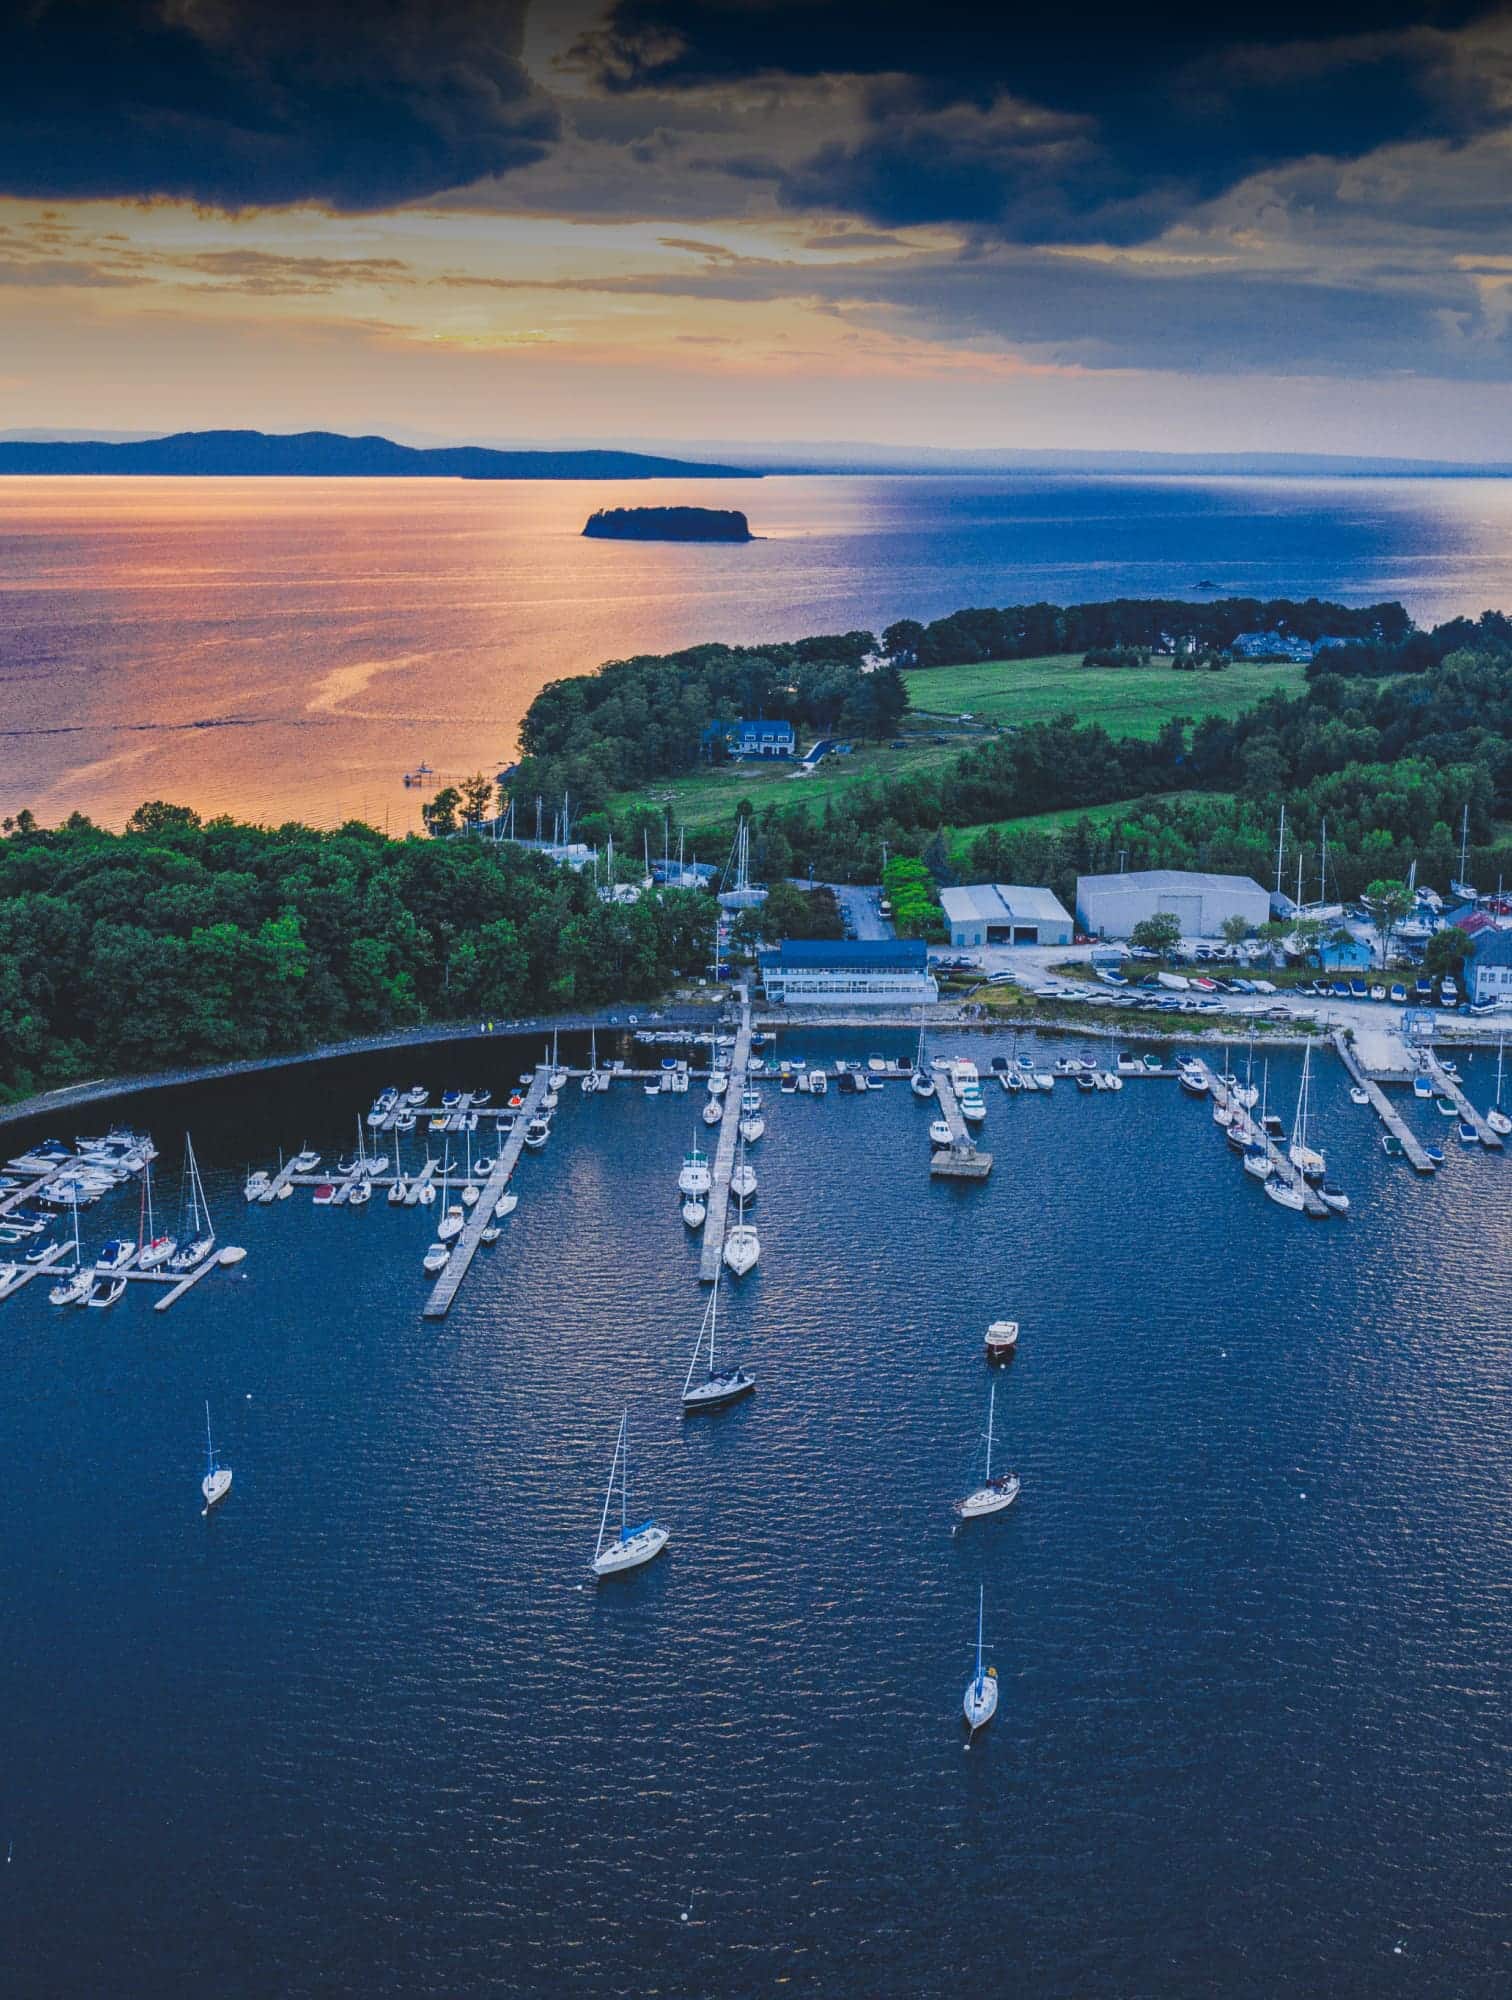 aerial view of marina and water at sunset with sailboats in the water